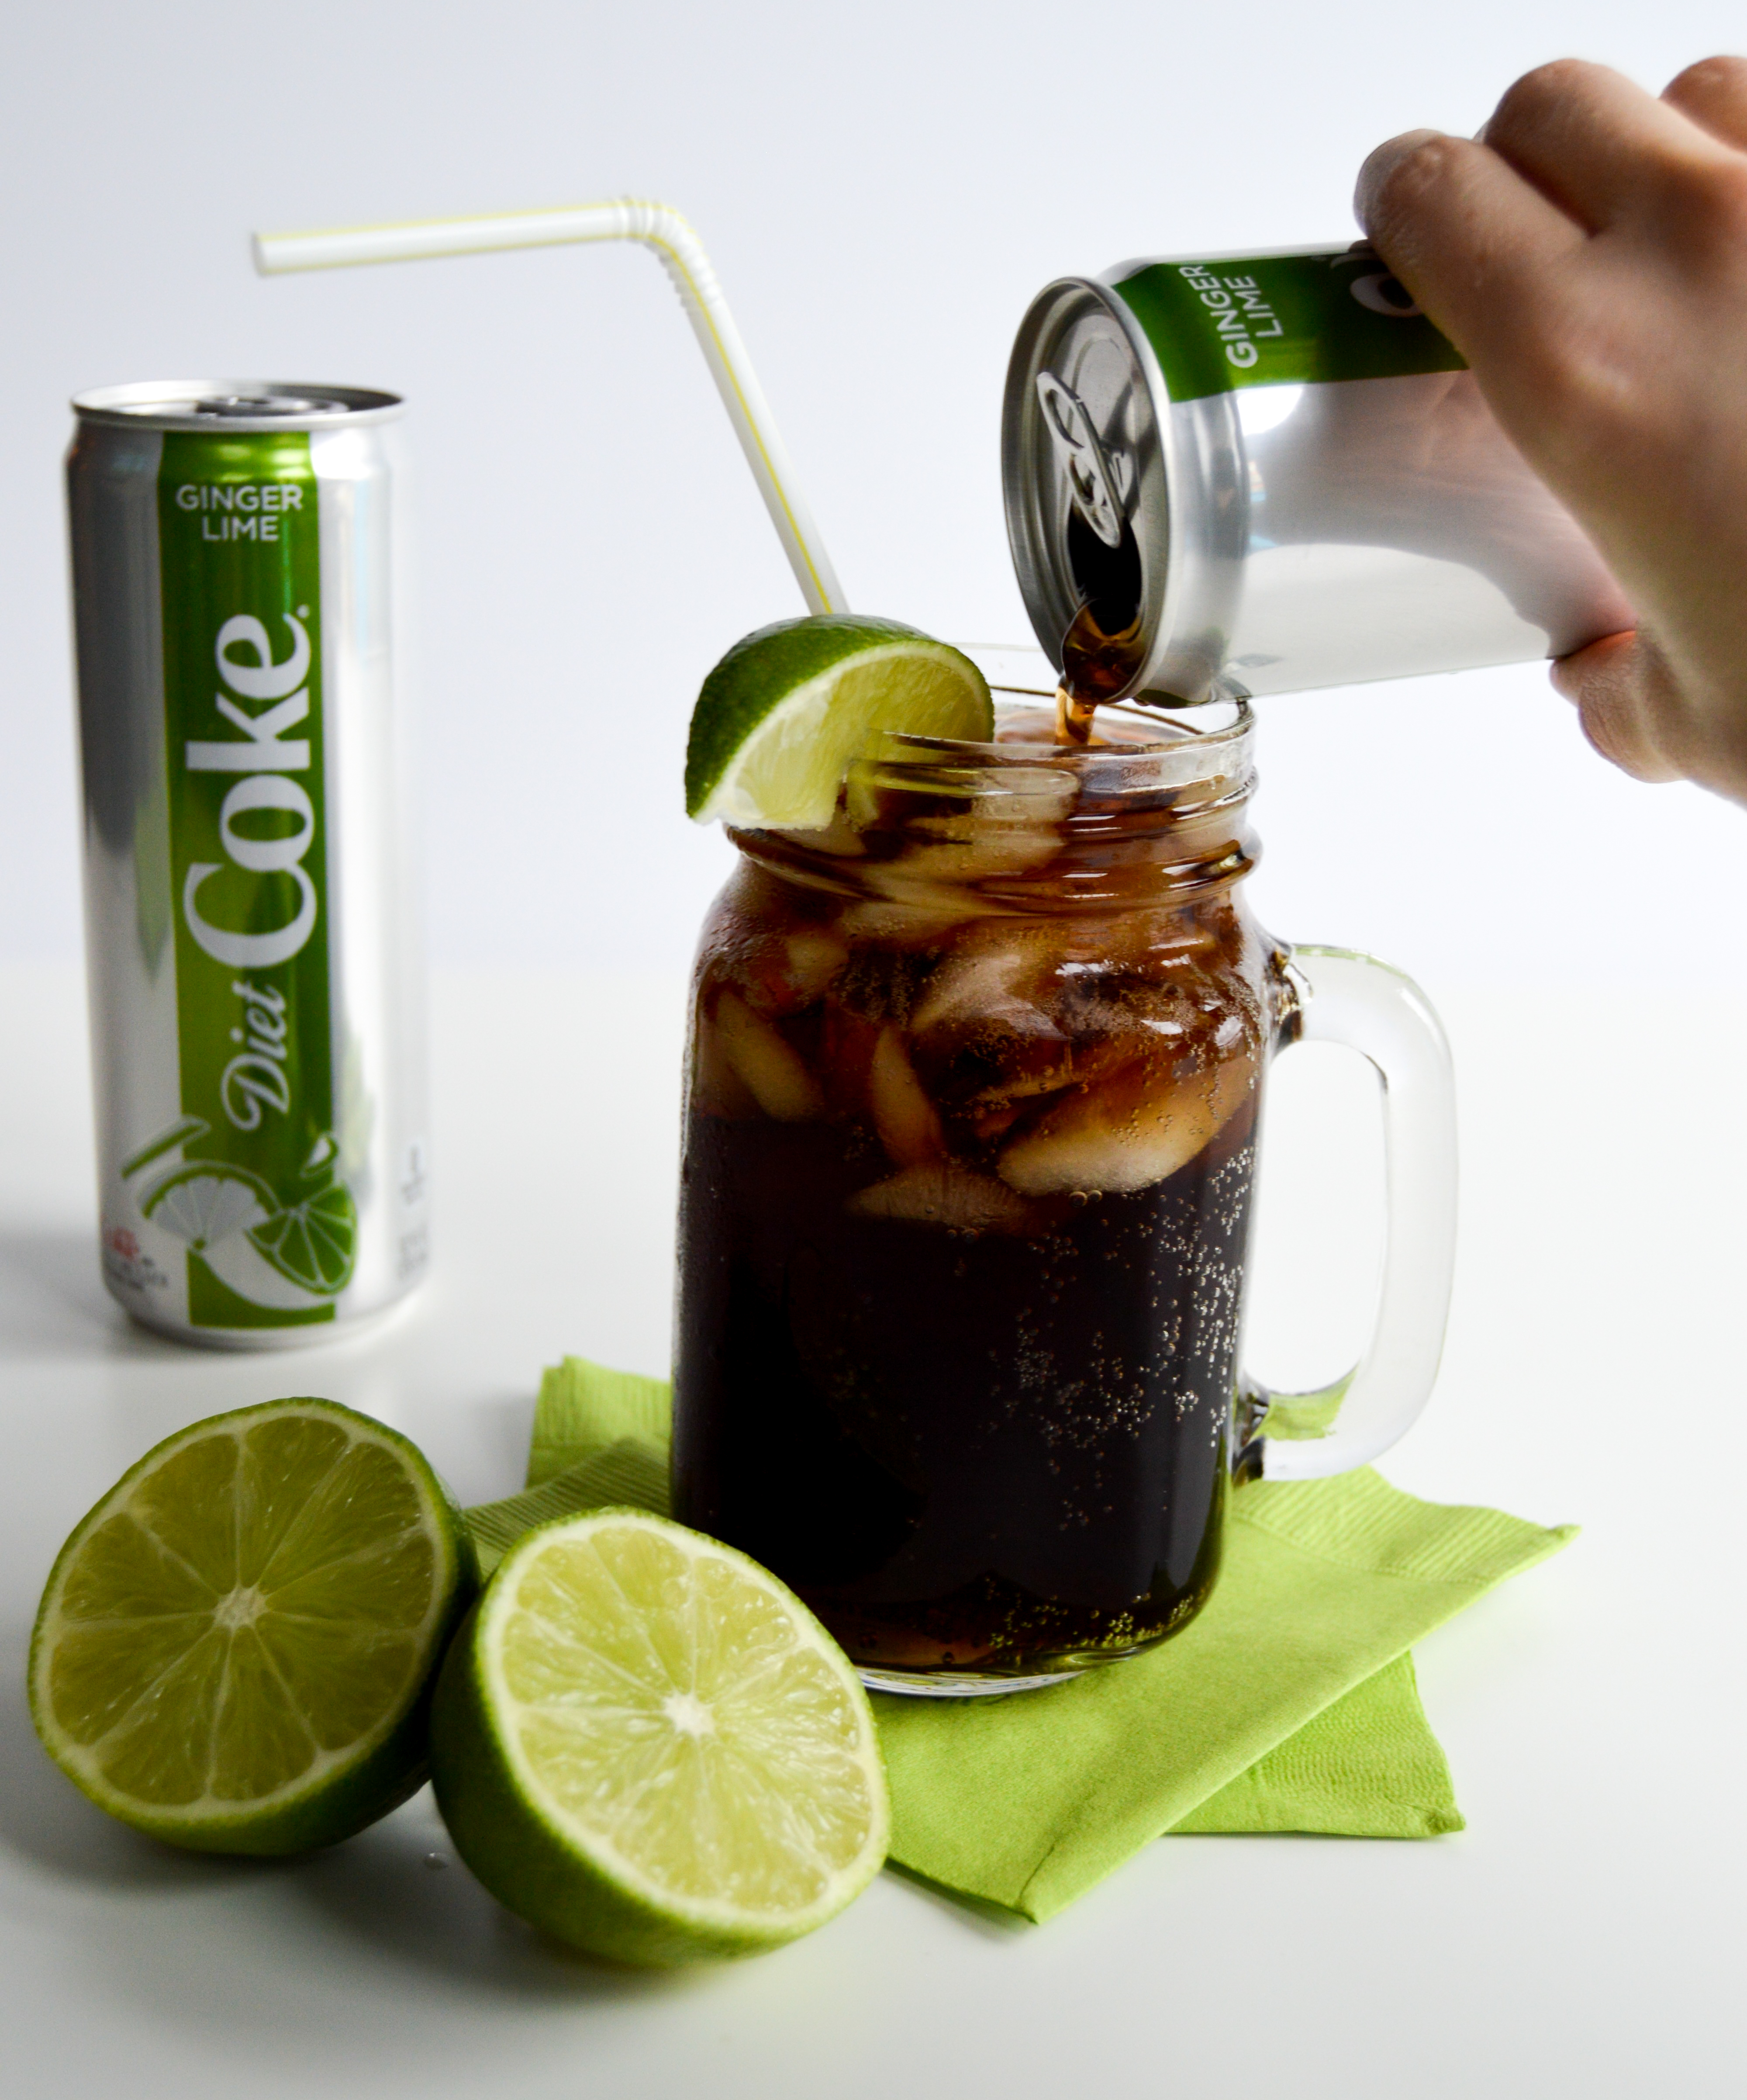 Diet Coke Ginger Lime over ice and with a lime wedge or in the can